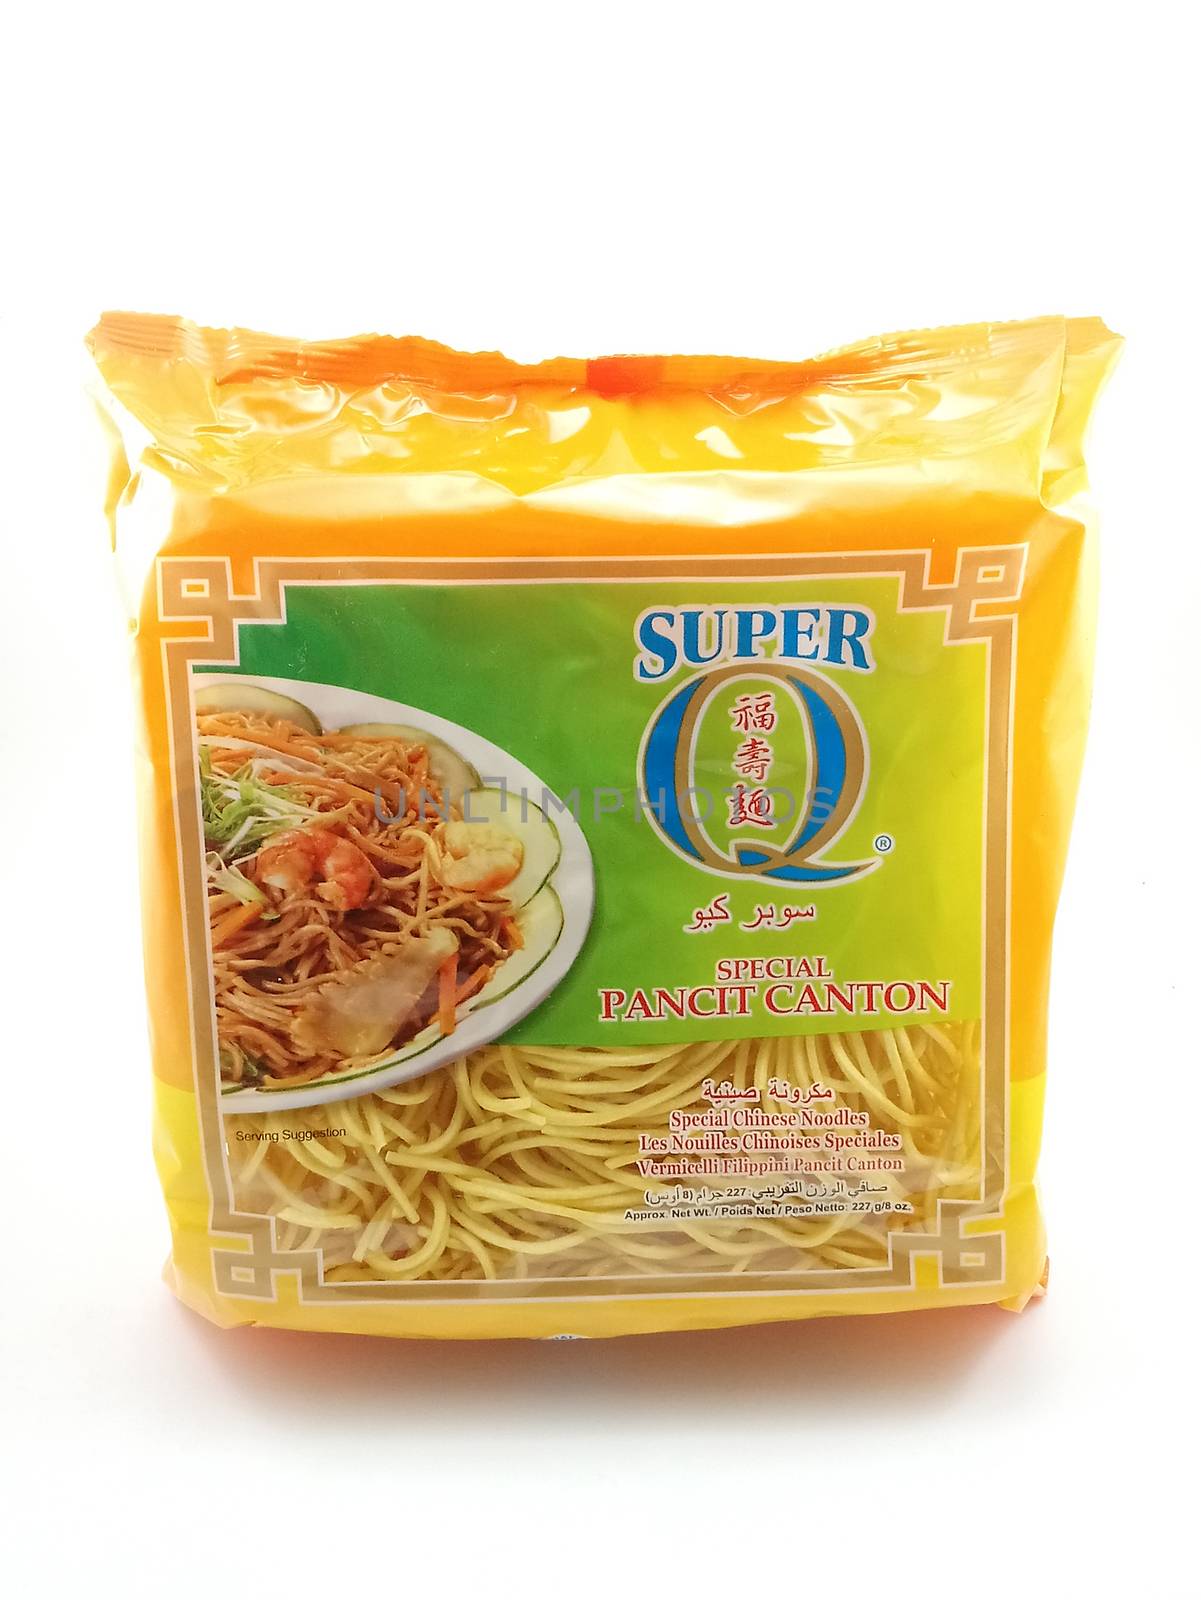 Super q special pancit canton in Manila, Philippines by imwaltersy